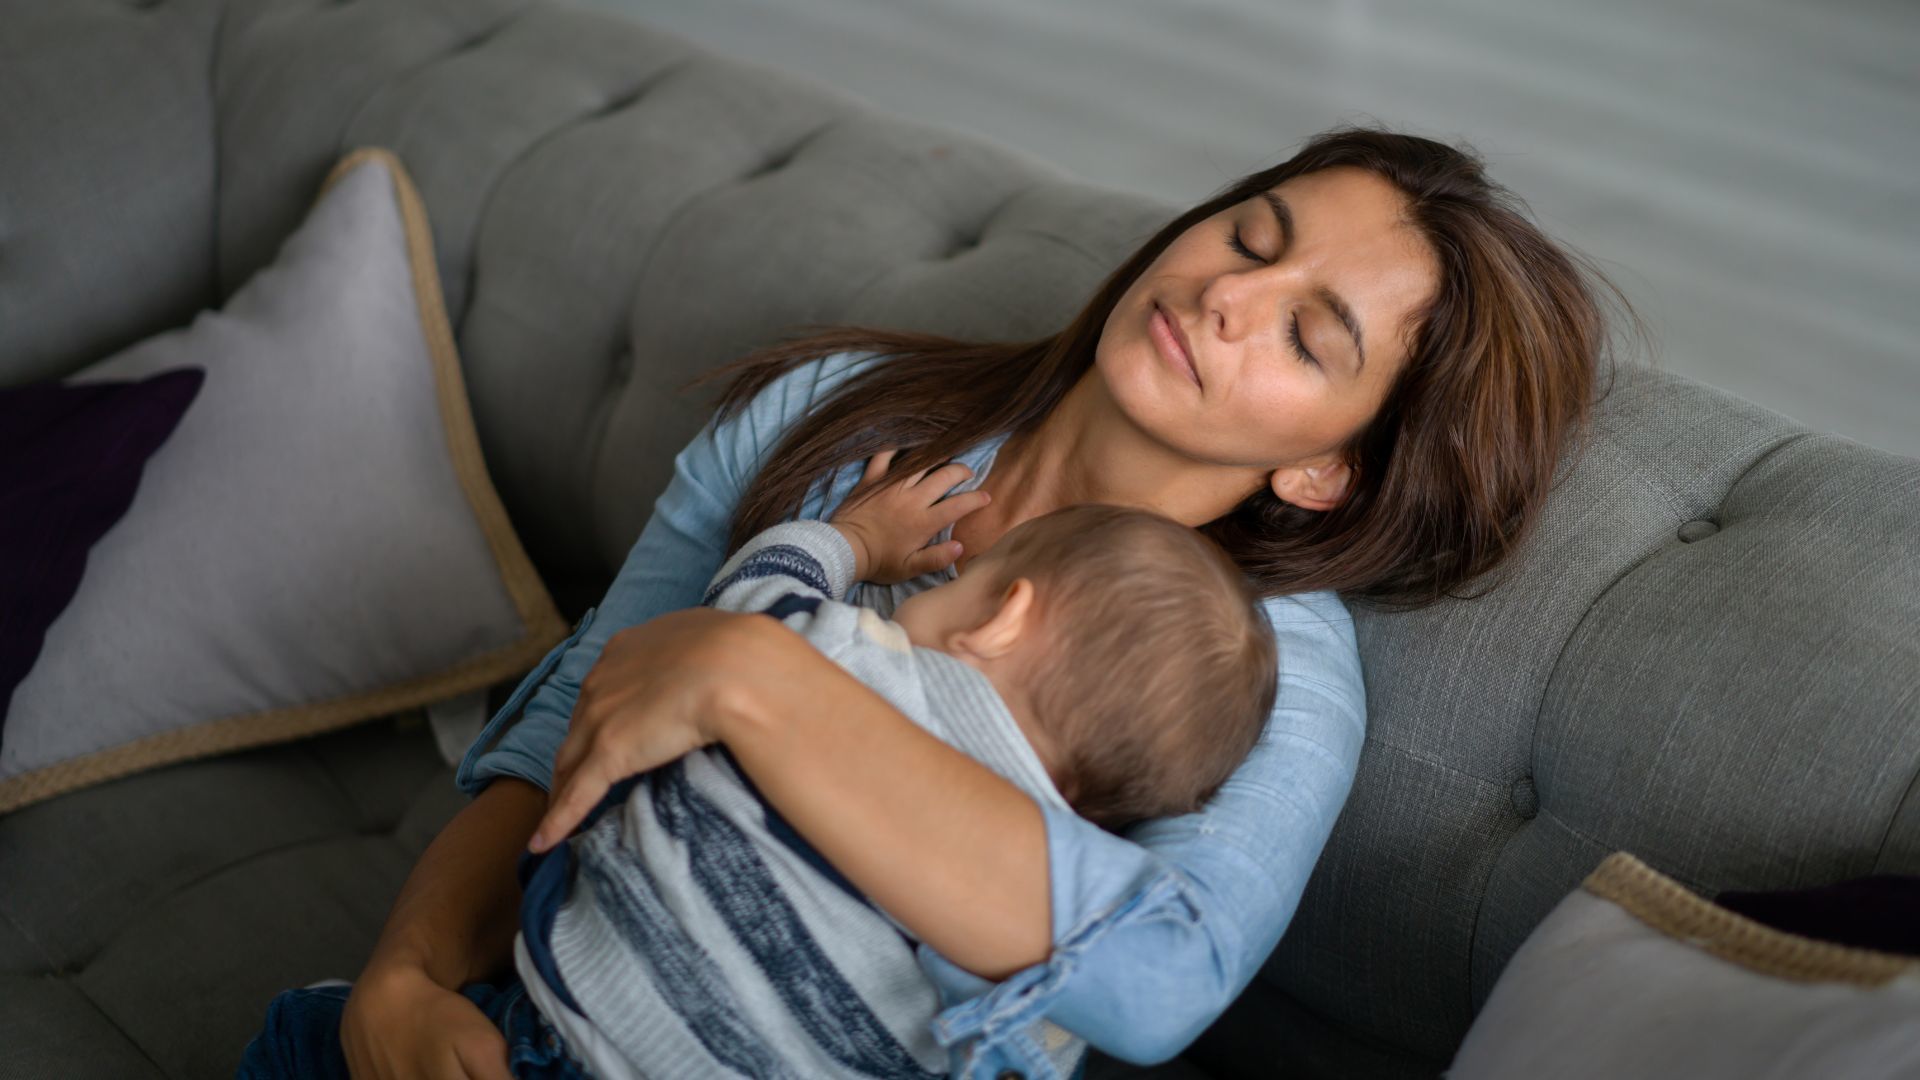 More Millennial Women Are Becoming Stay-At-Home Moms -- Here's Why